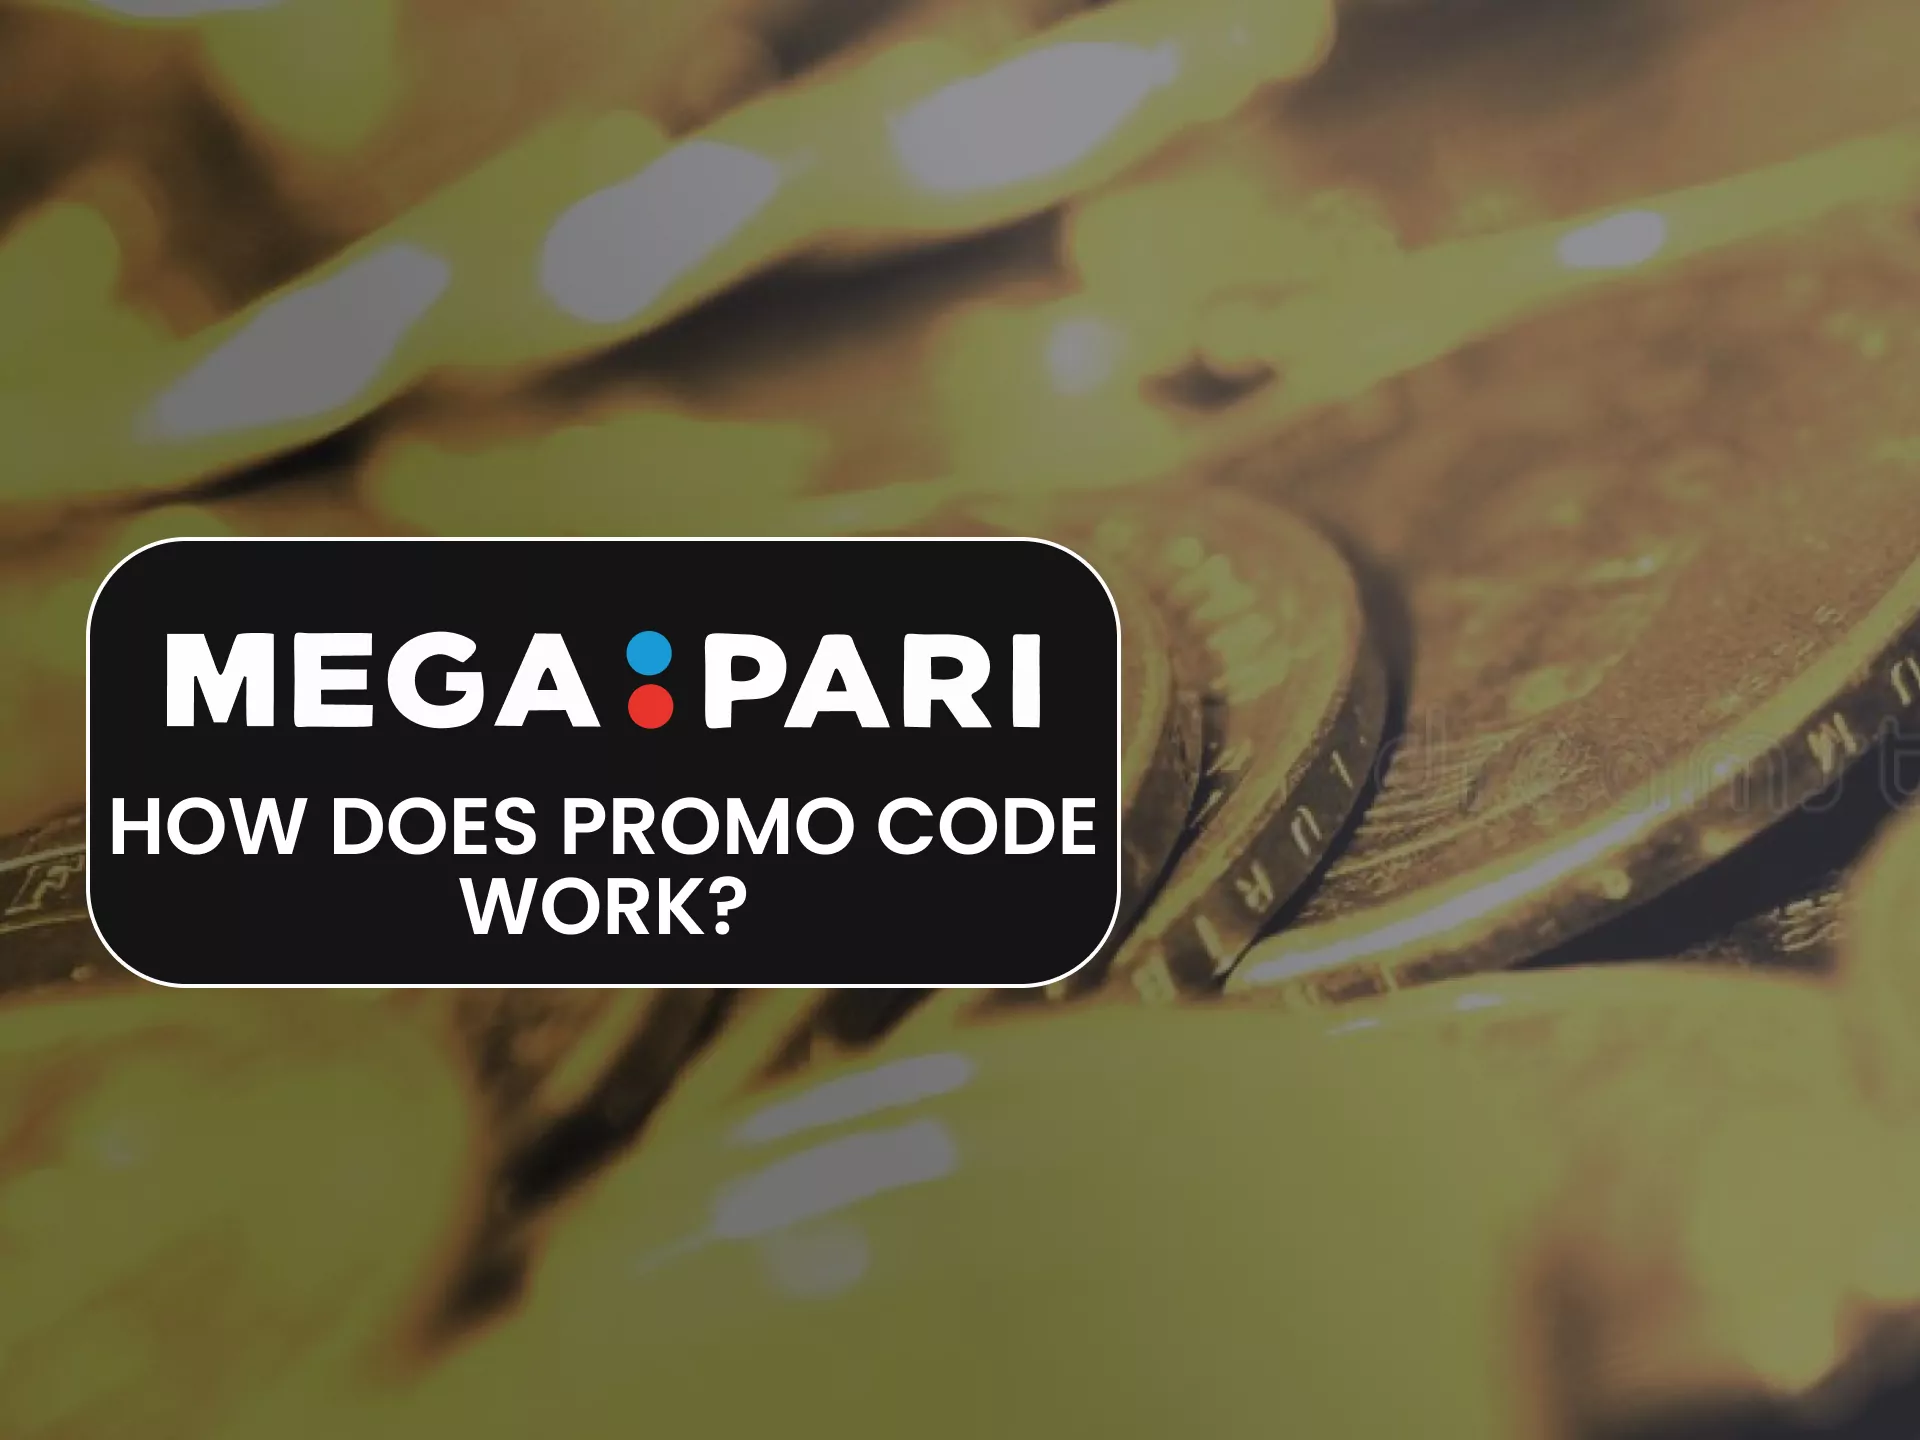 Learn about the conditions of the Megapari promo code.